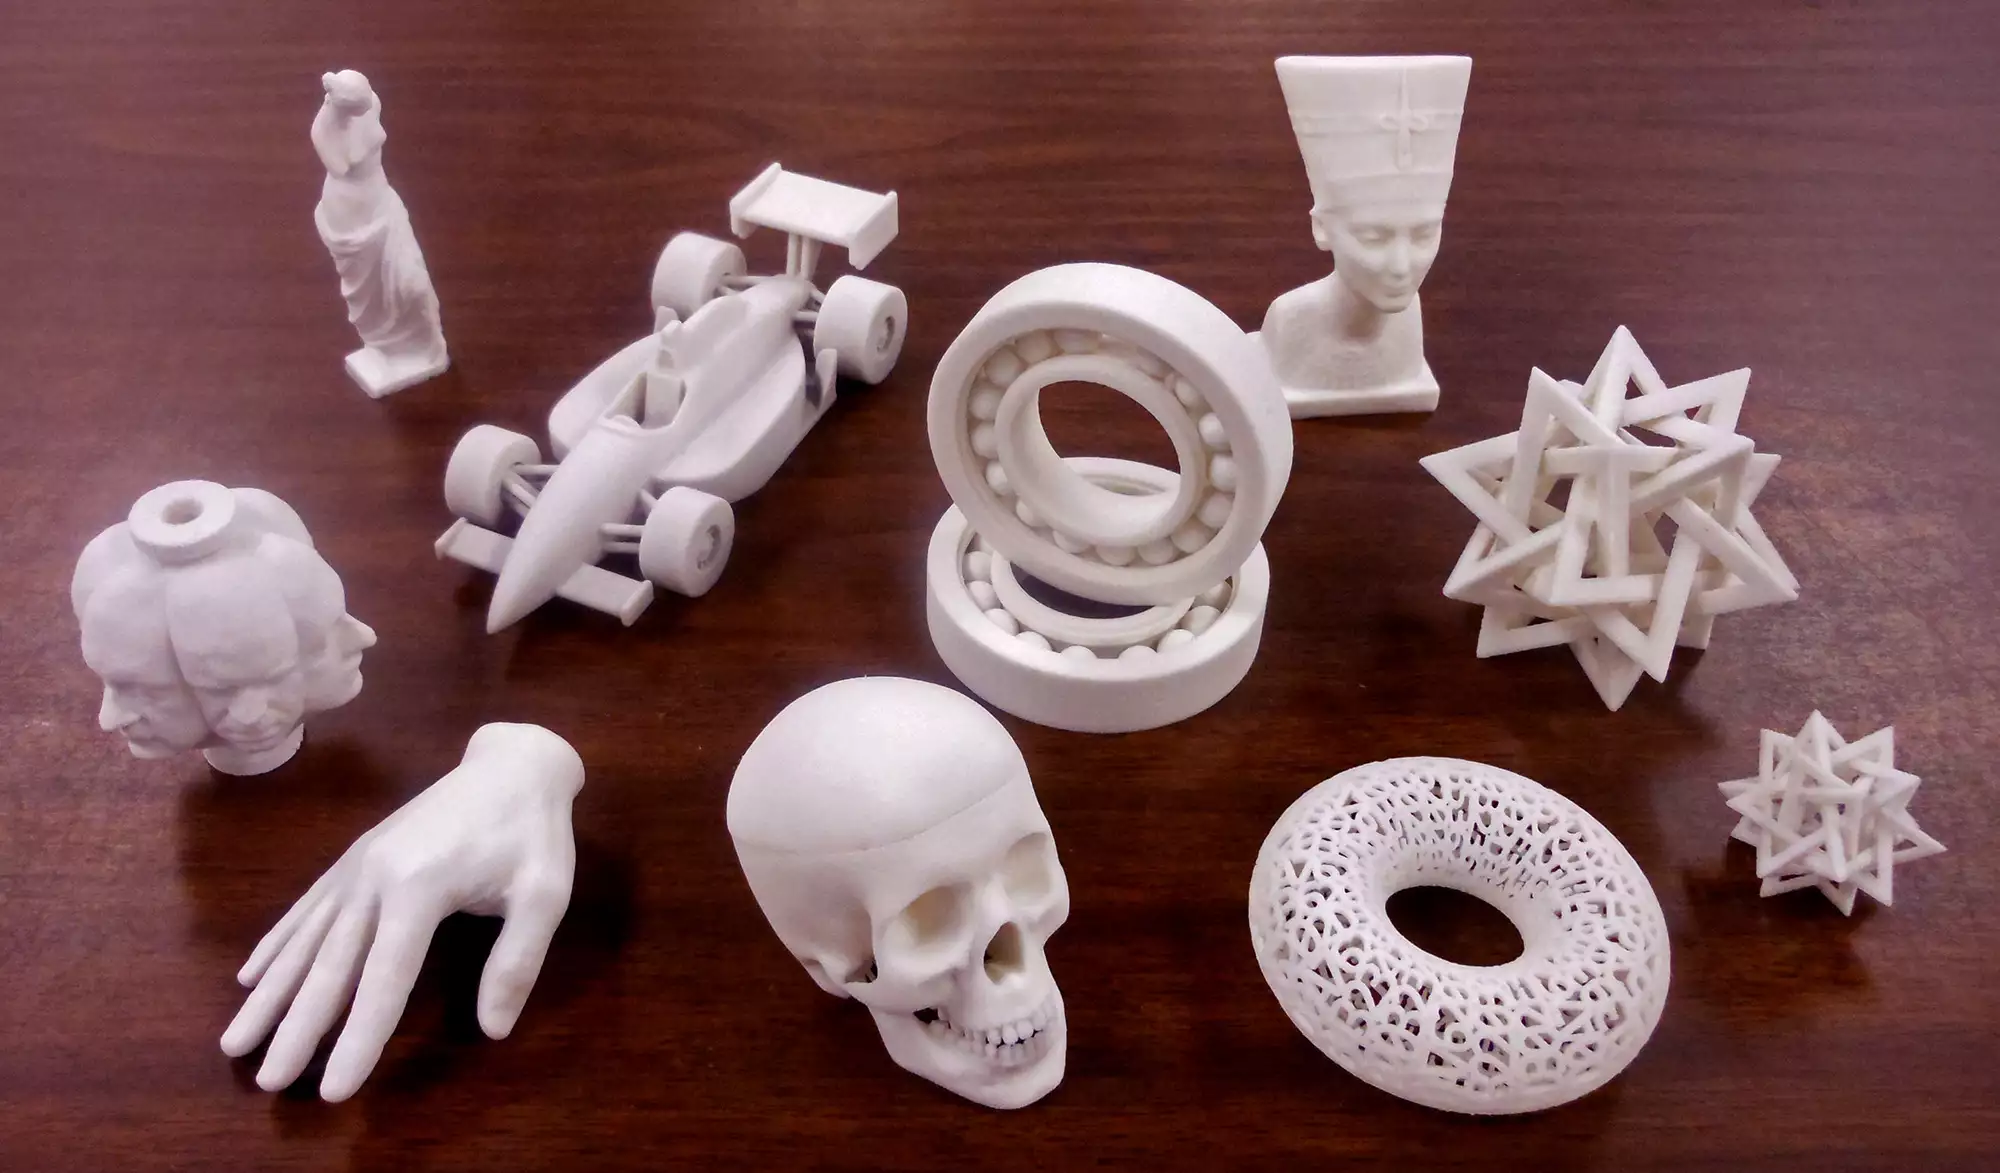 to 3D printing